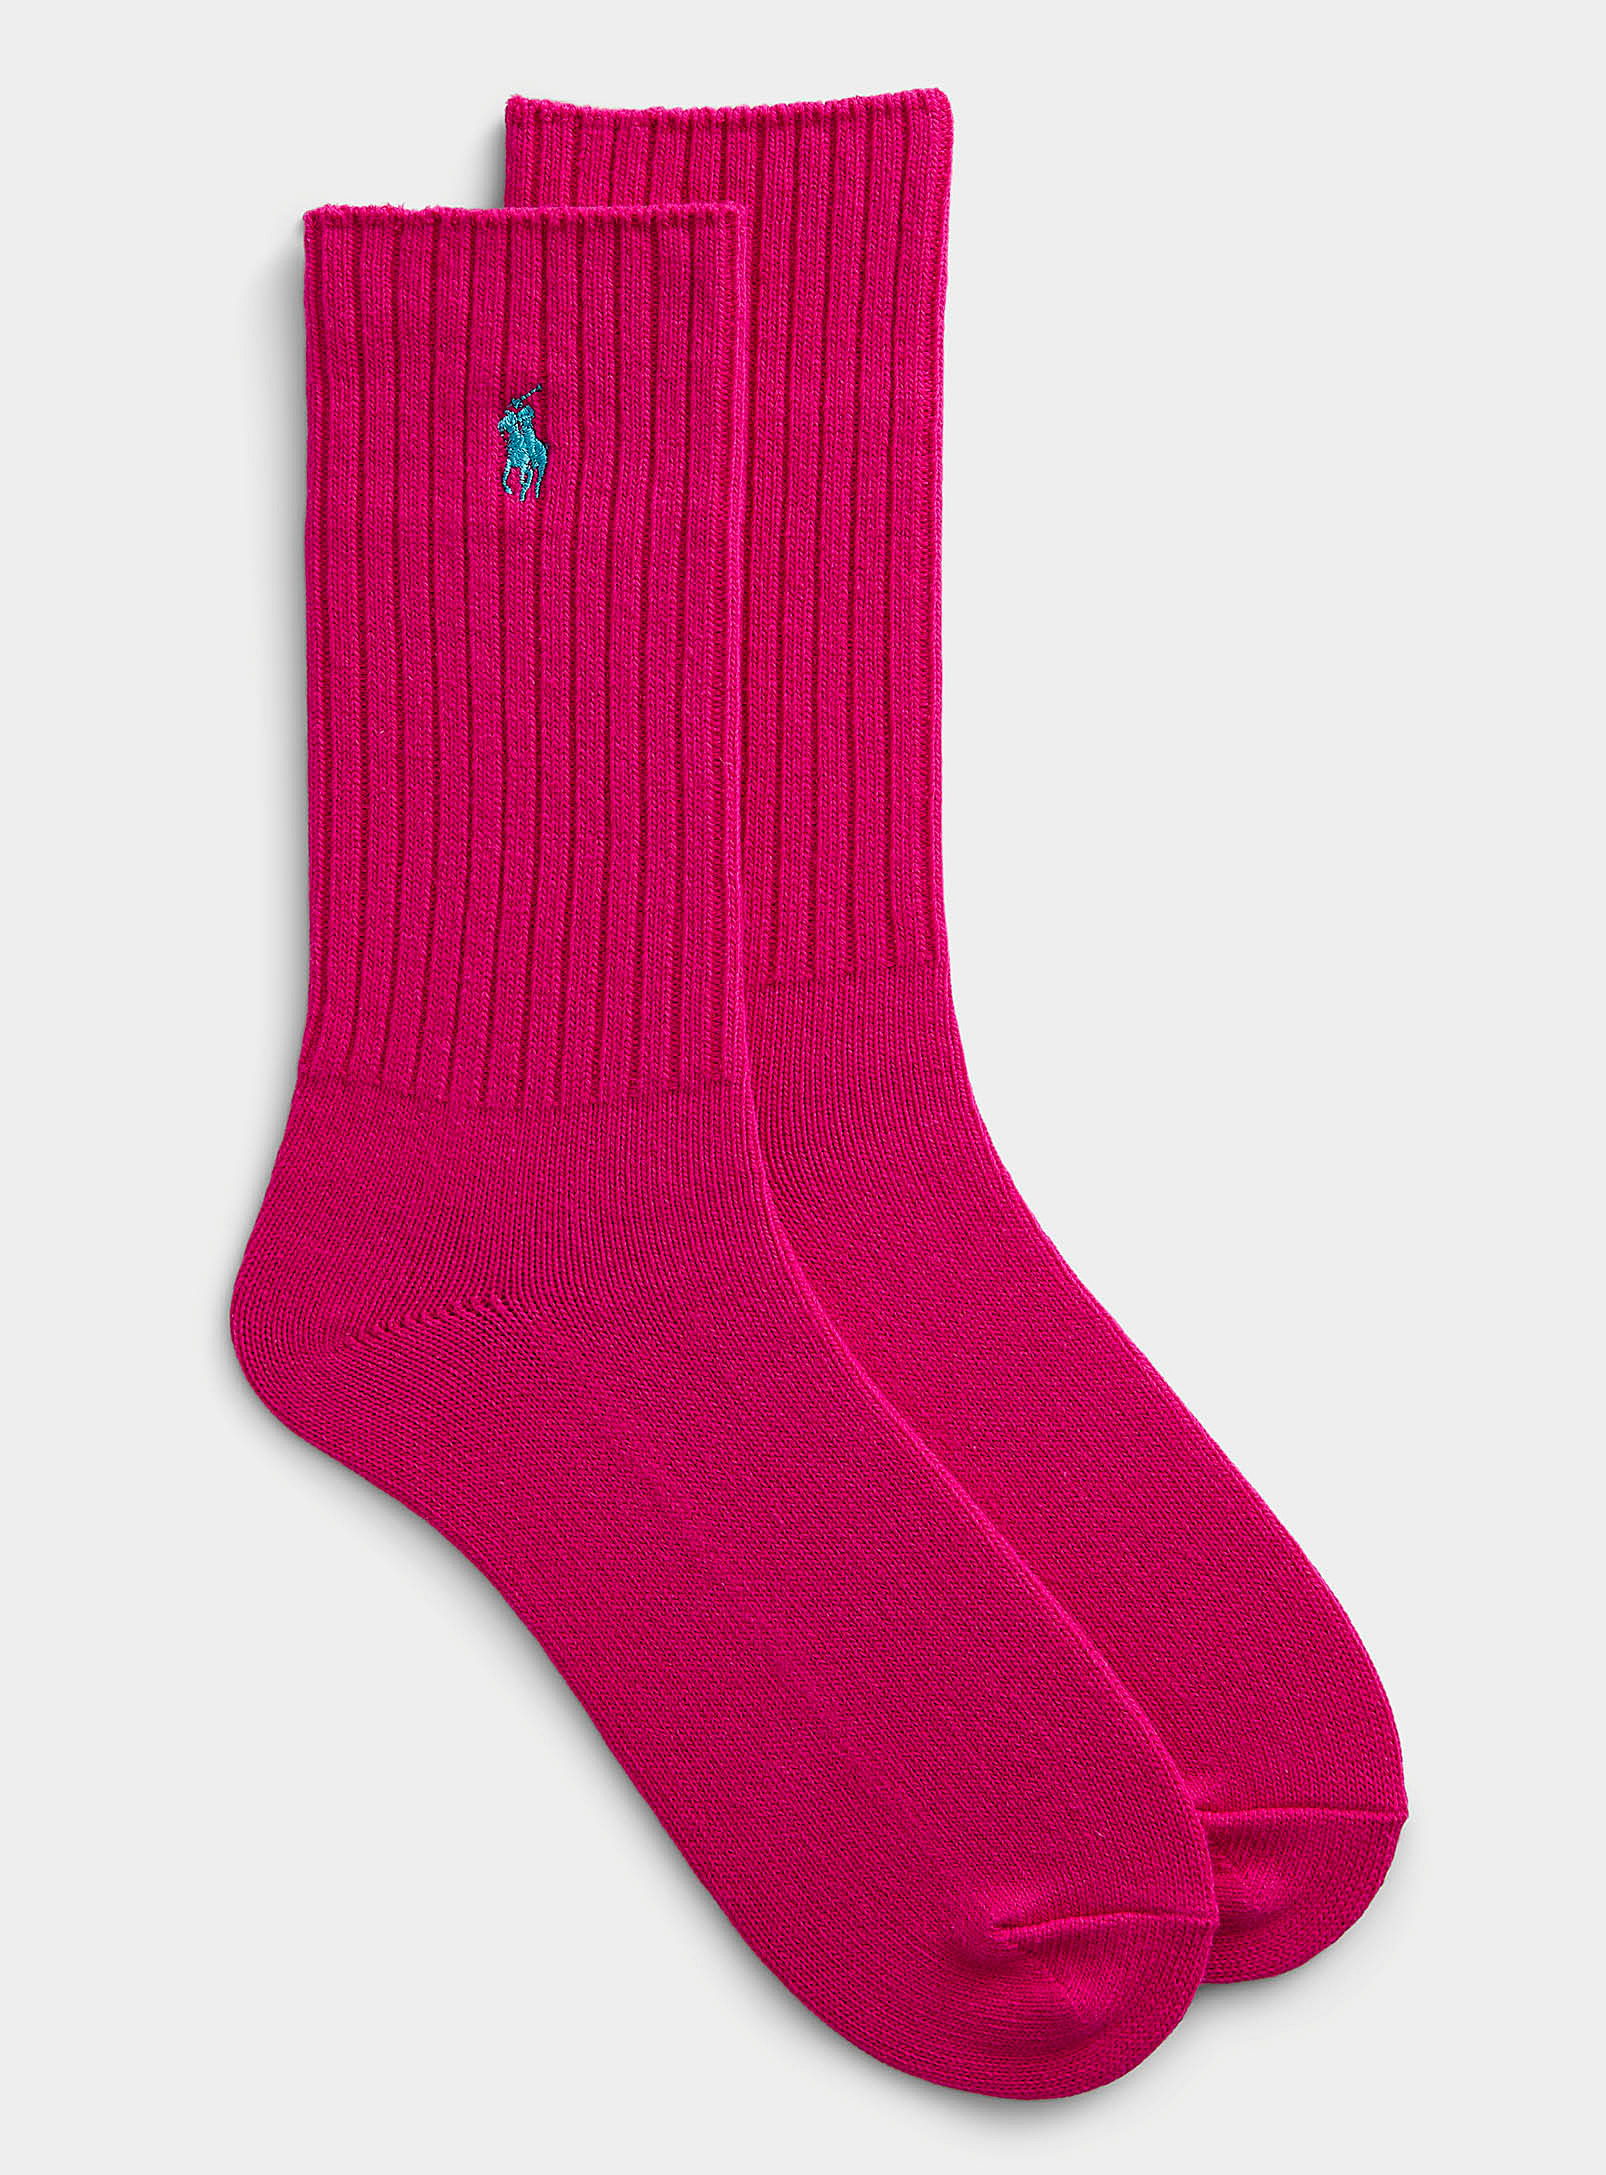 Polo Ralph Lauren - Men's Signature solid ribbed socks (Men, Pink, ONE  SIZE) | Square One